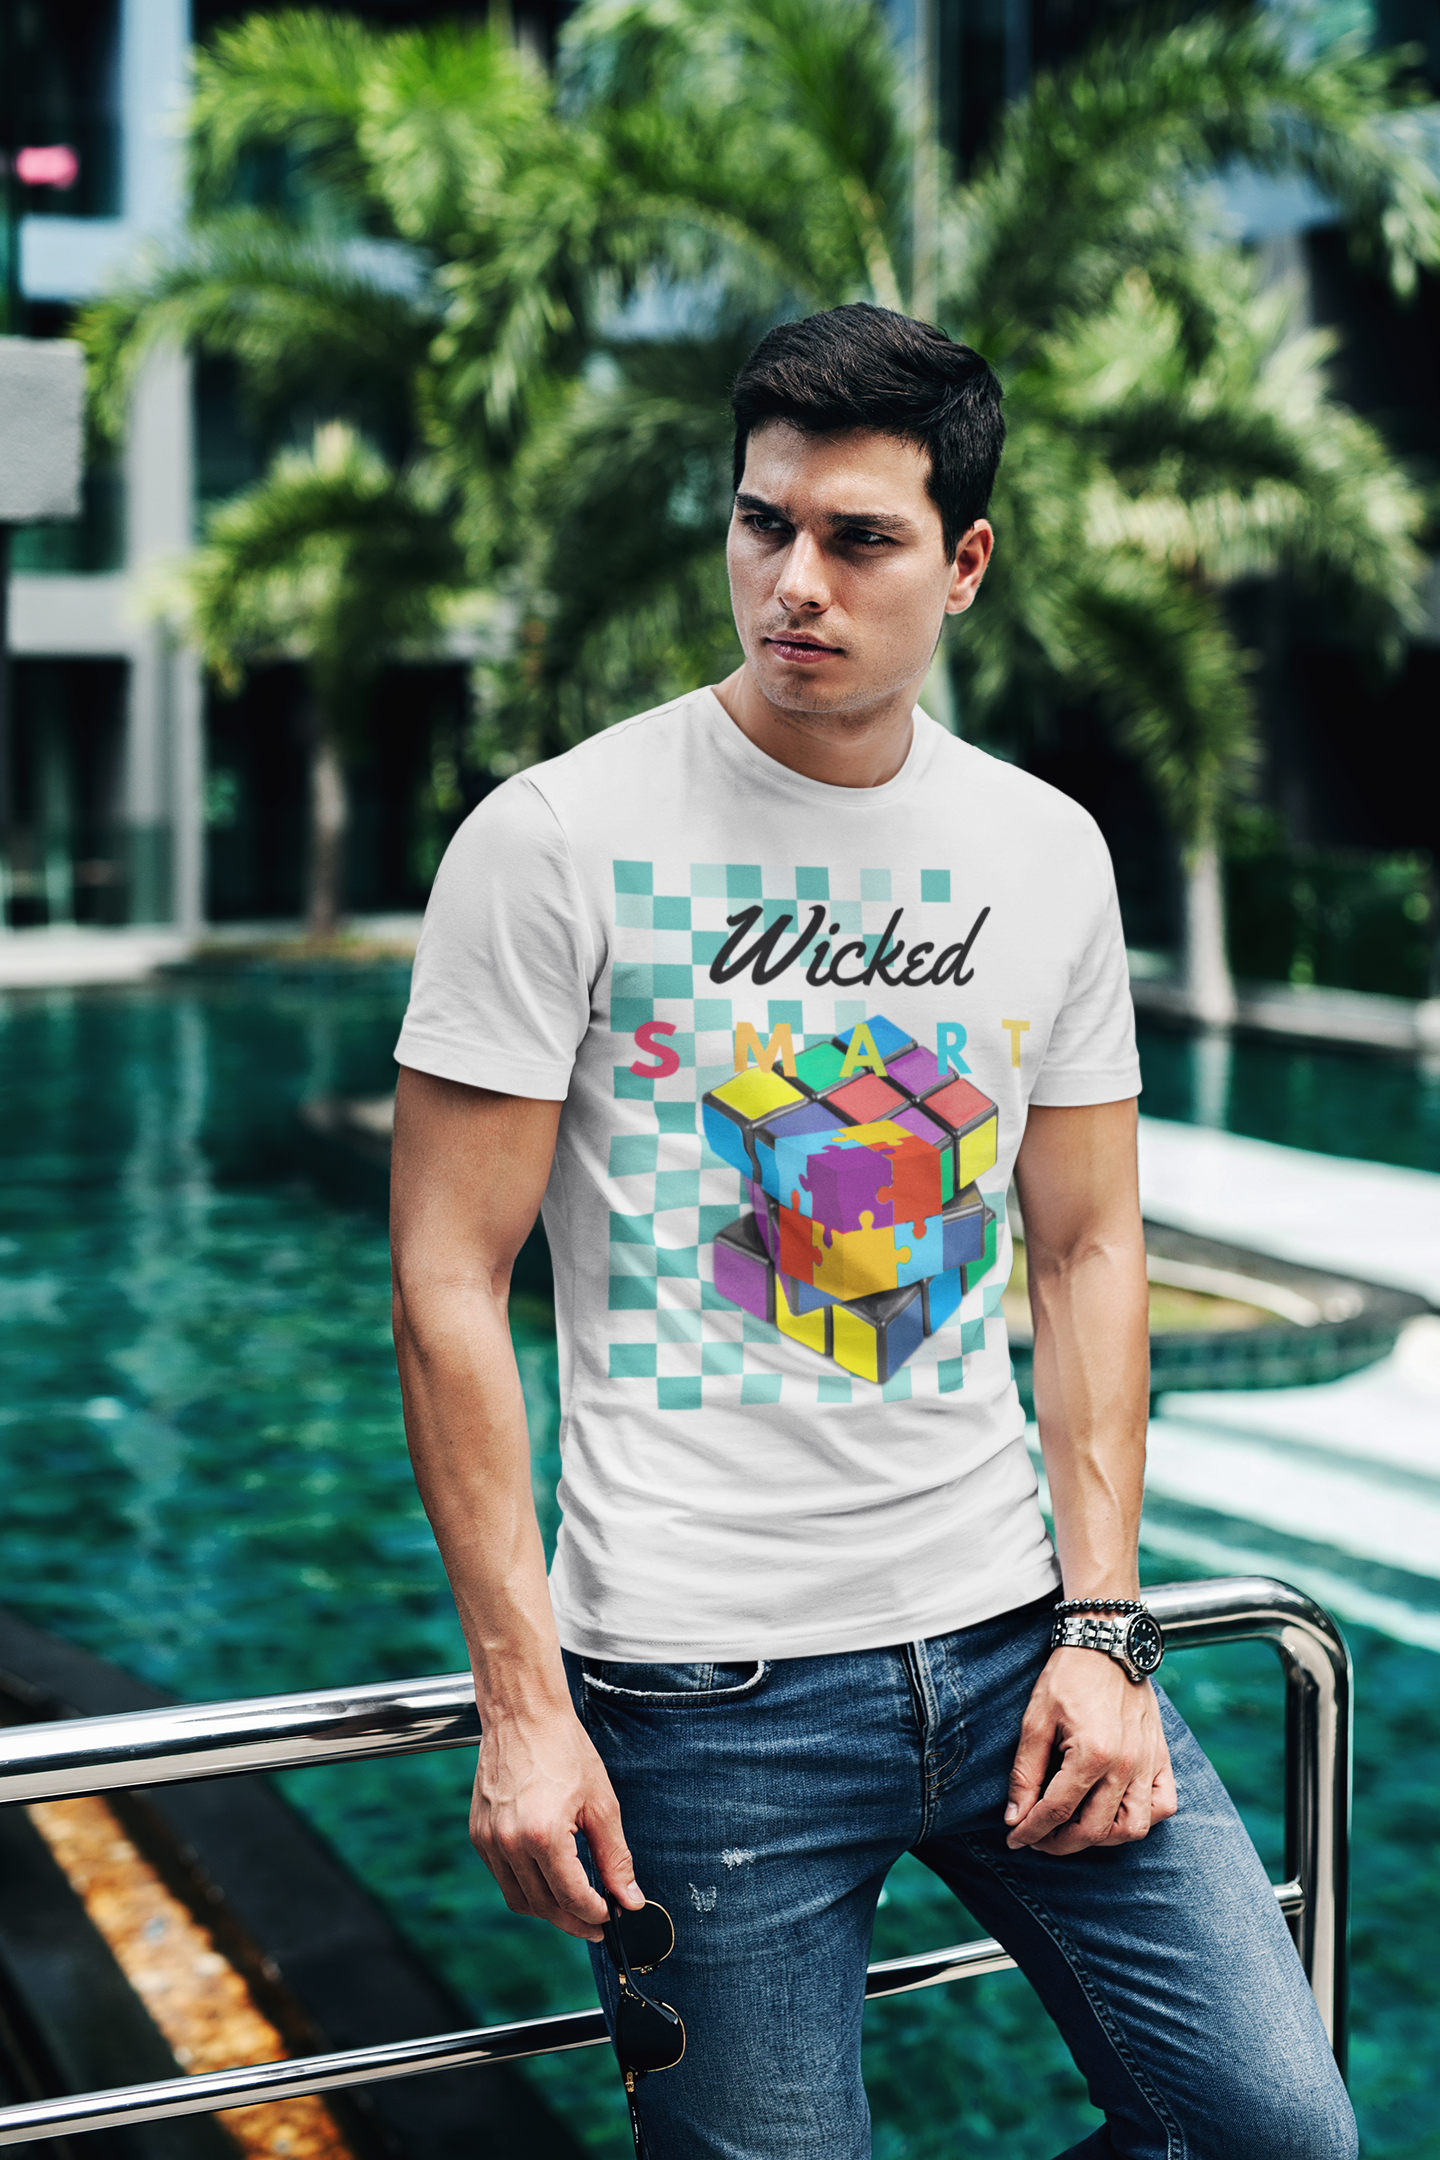 Wicked Smart 3-D Puzzle Cube Short Sleeve Unisex Softstyle Tee